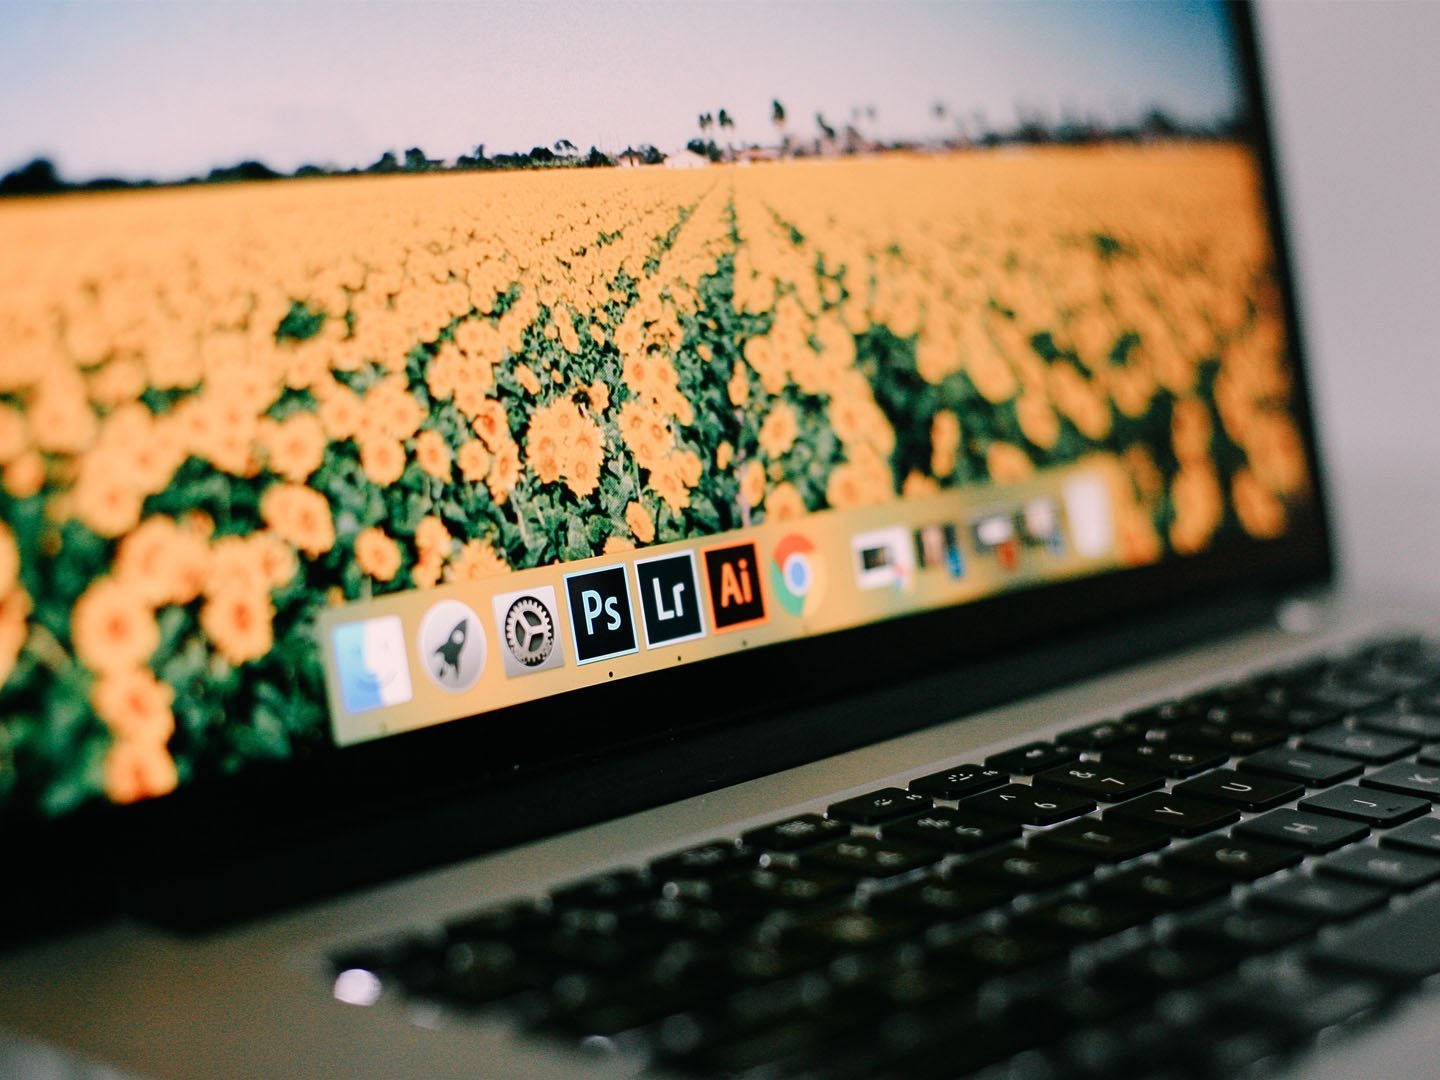 A close up photo of an Apple Macbook laptop, focused on the bar with three active applications, Adobe Photoshop, Adobe Lightroom, and Adobe Illustrator. This is an image relating to the tutorial article: How to resize multiple images in Photoshop at once.